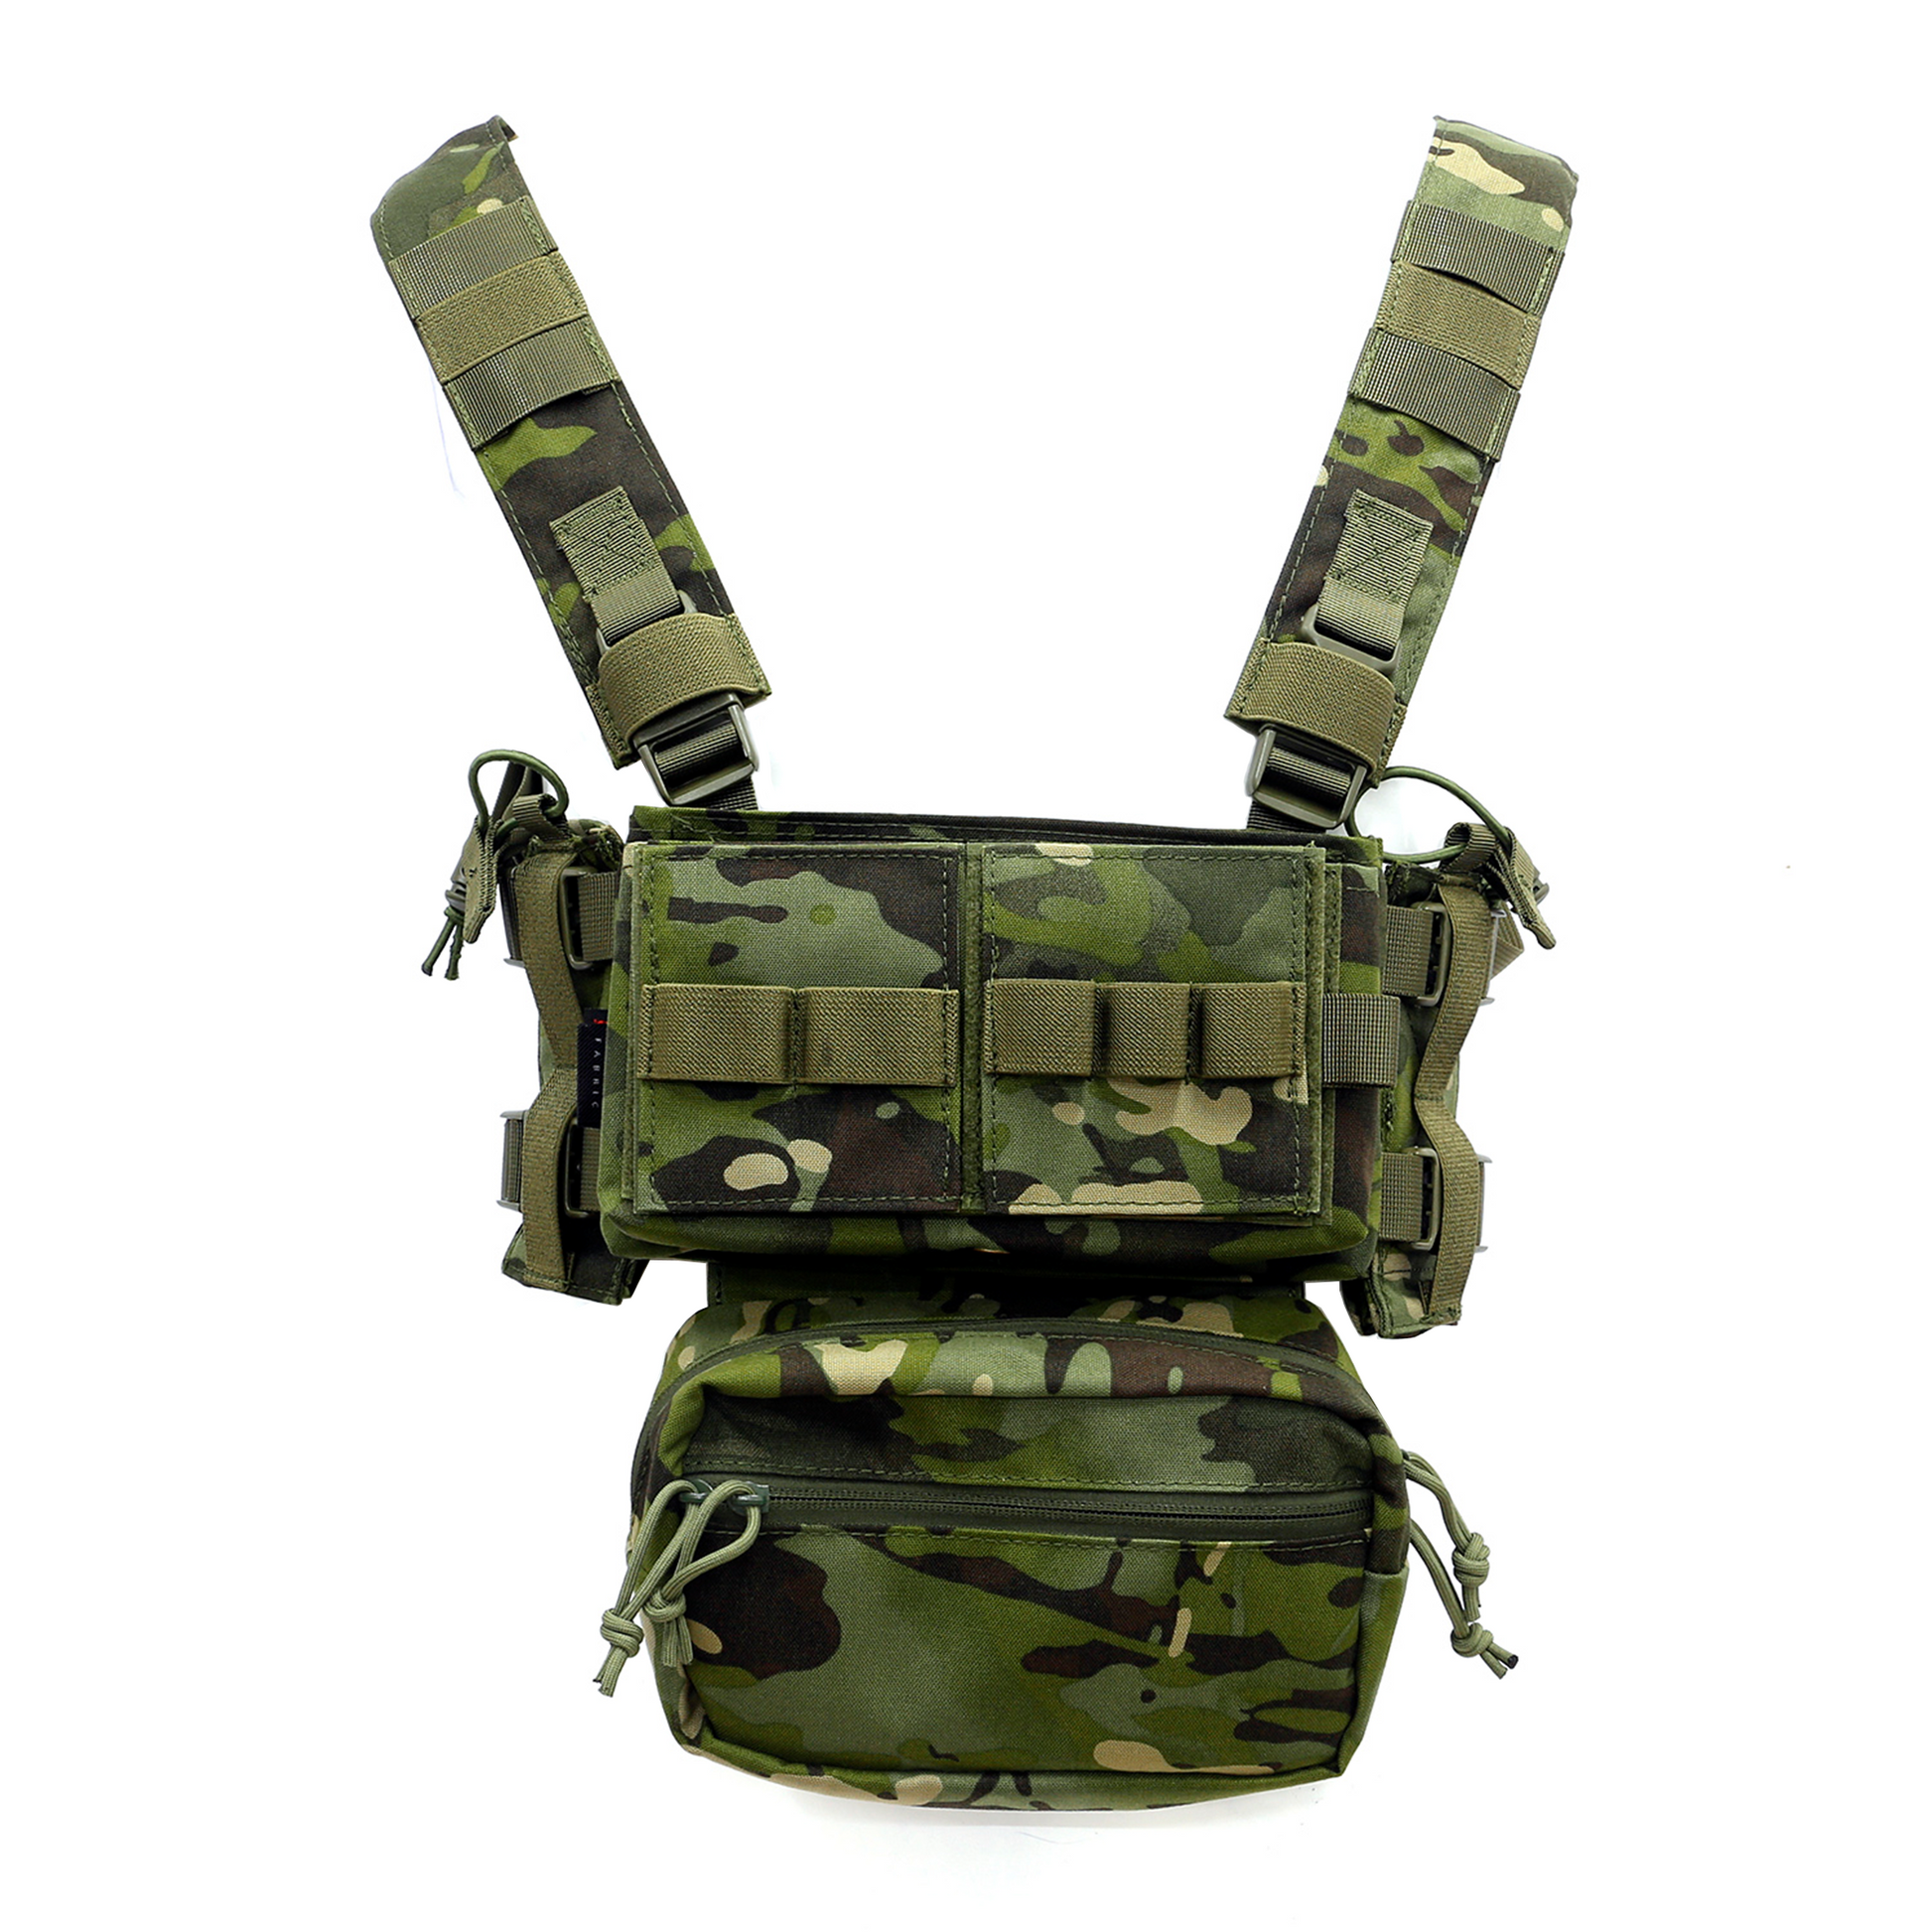 IJ Tactical Chest Rig